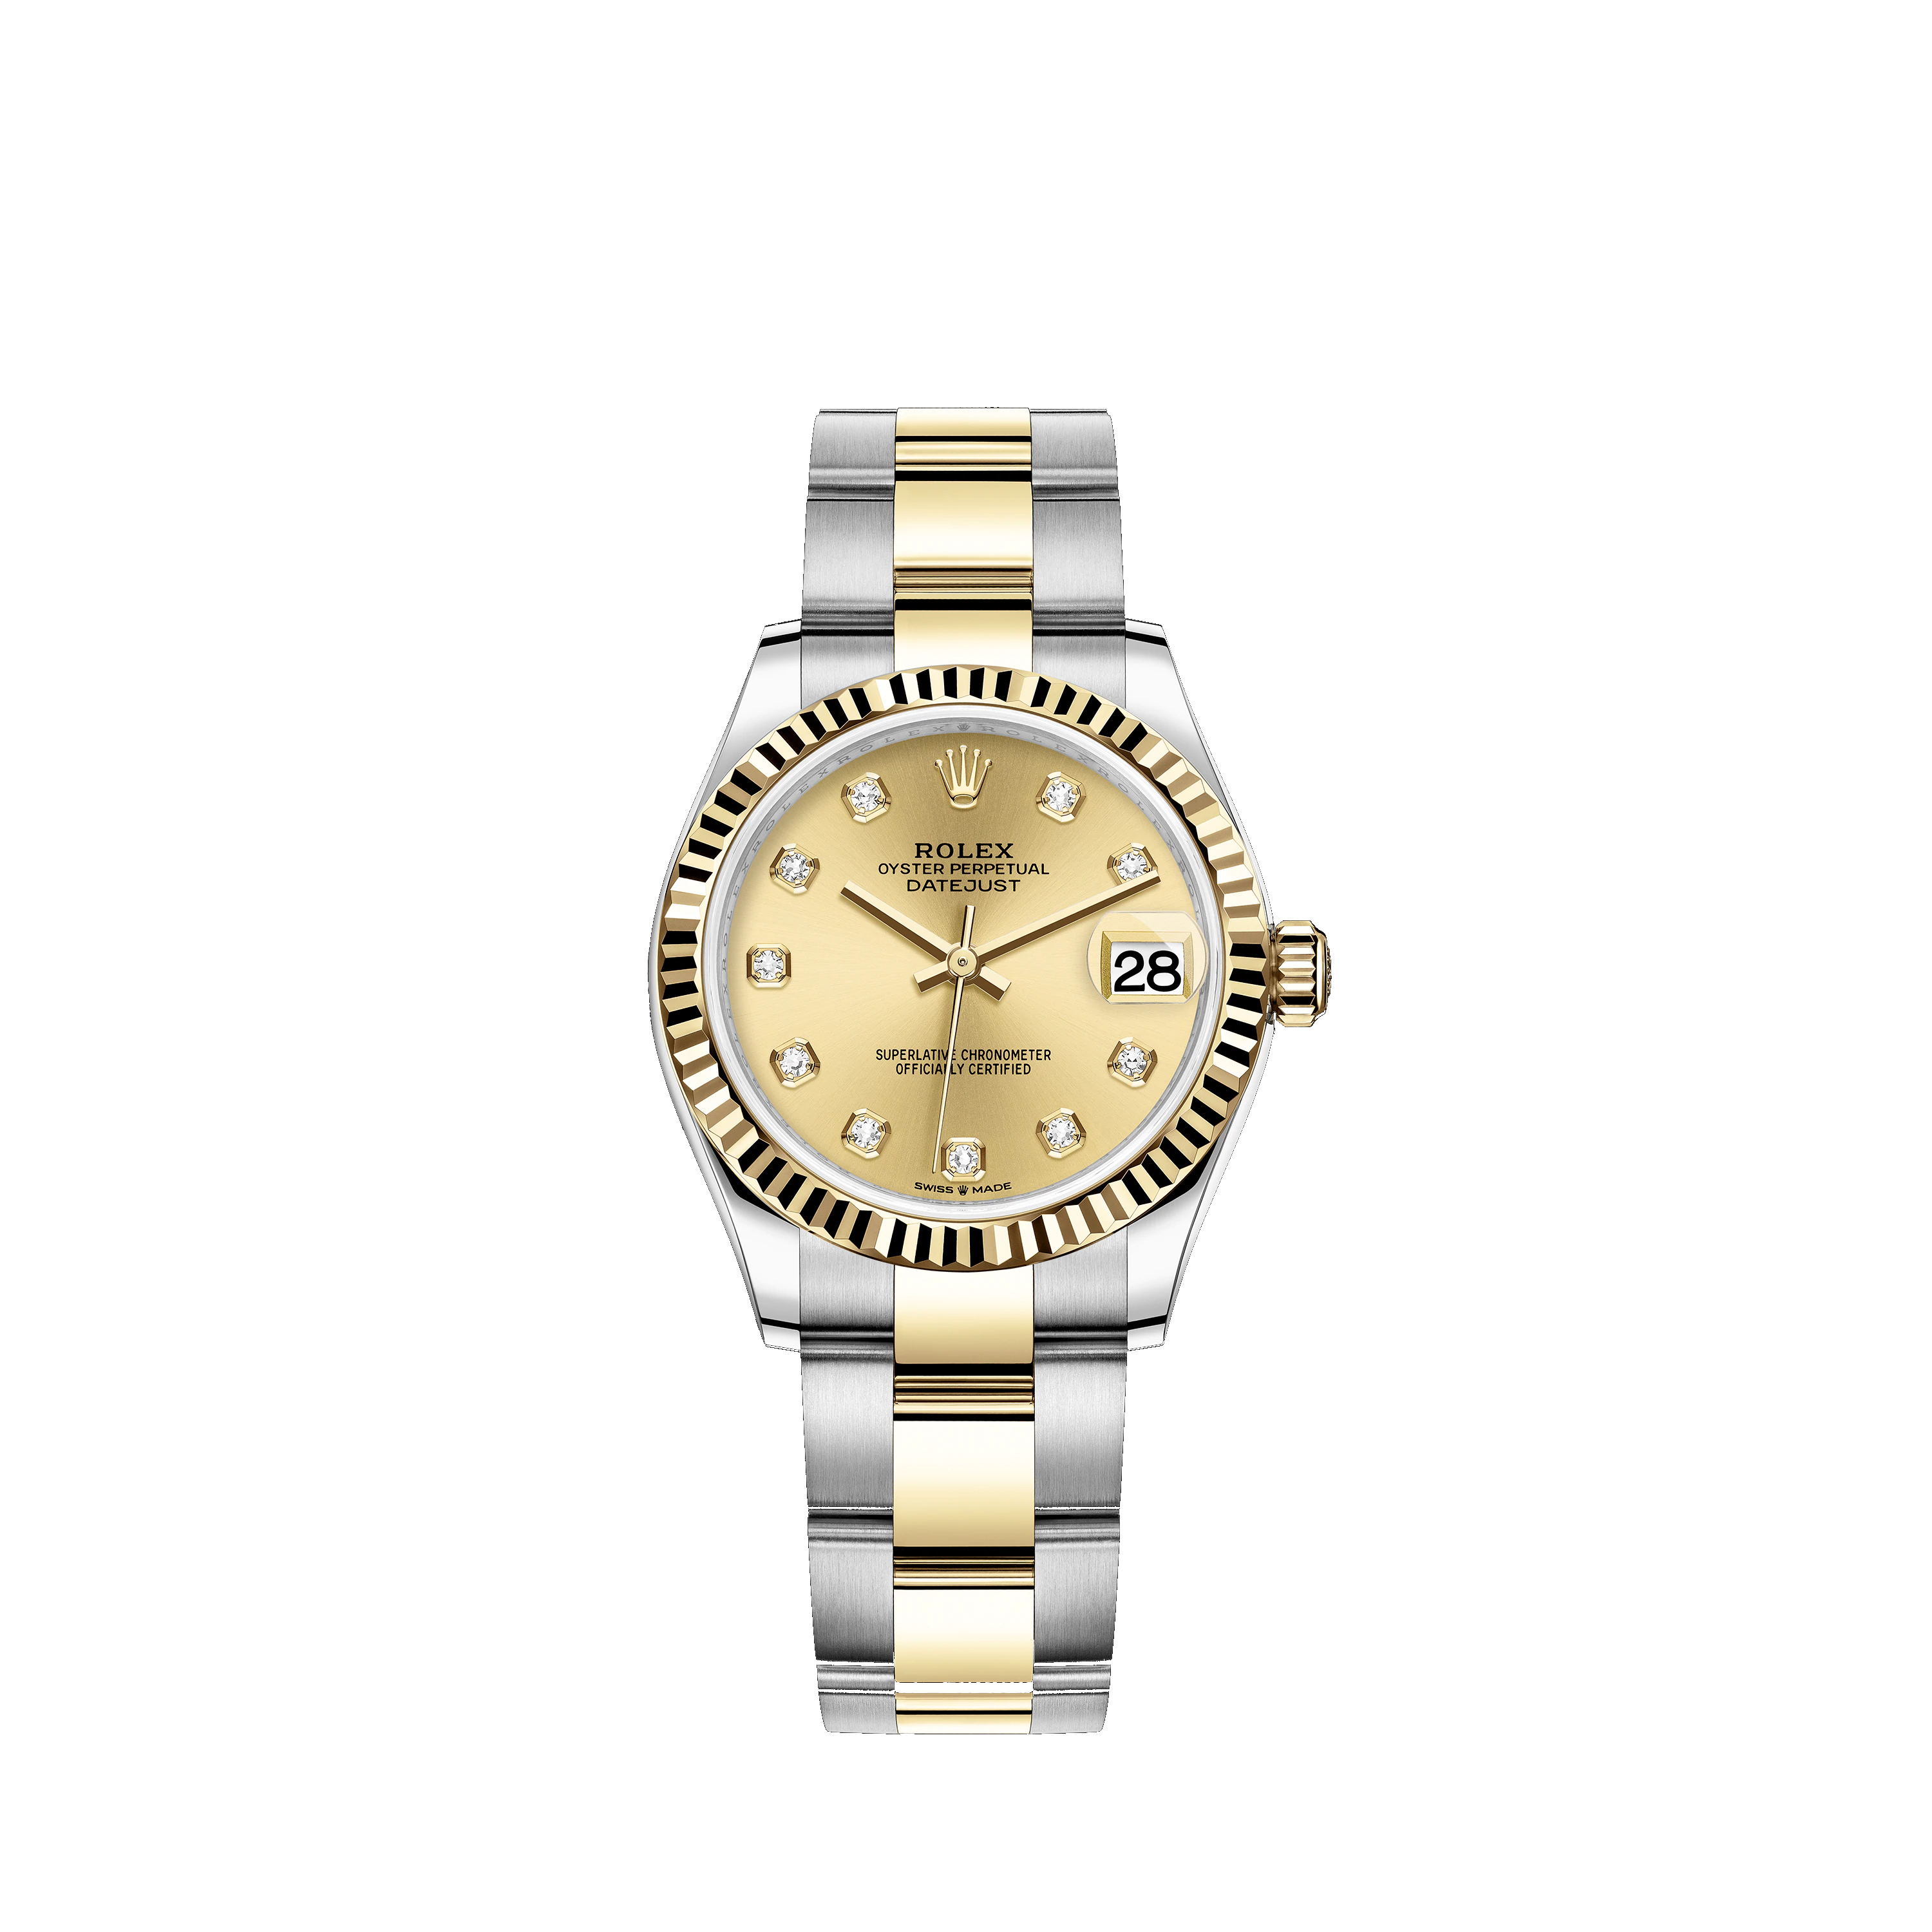 Datejust 31 278273 Gold & Stainless Steel Watch (Champagne-Colour Set with Diamonds)